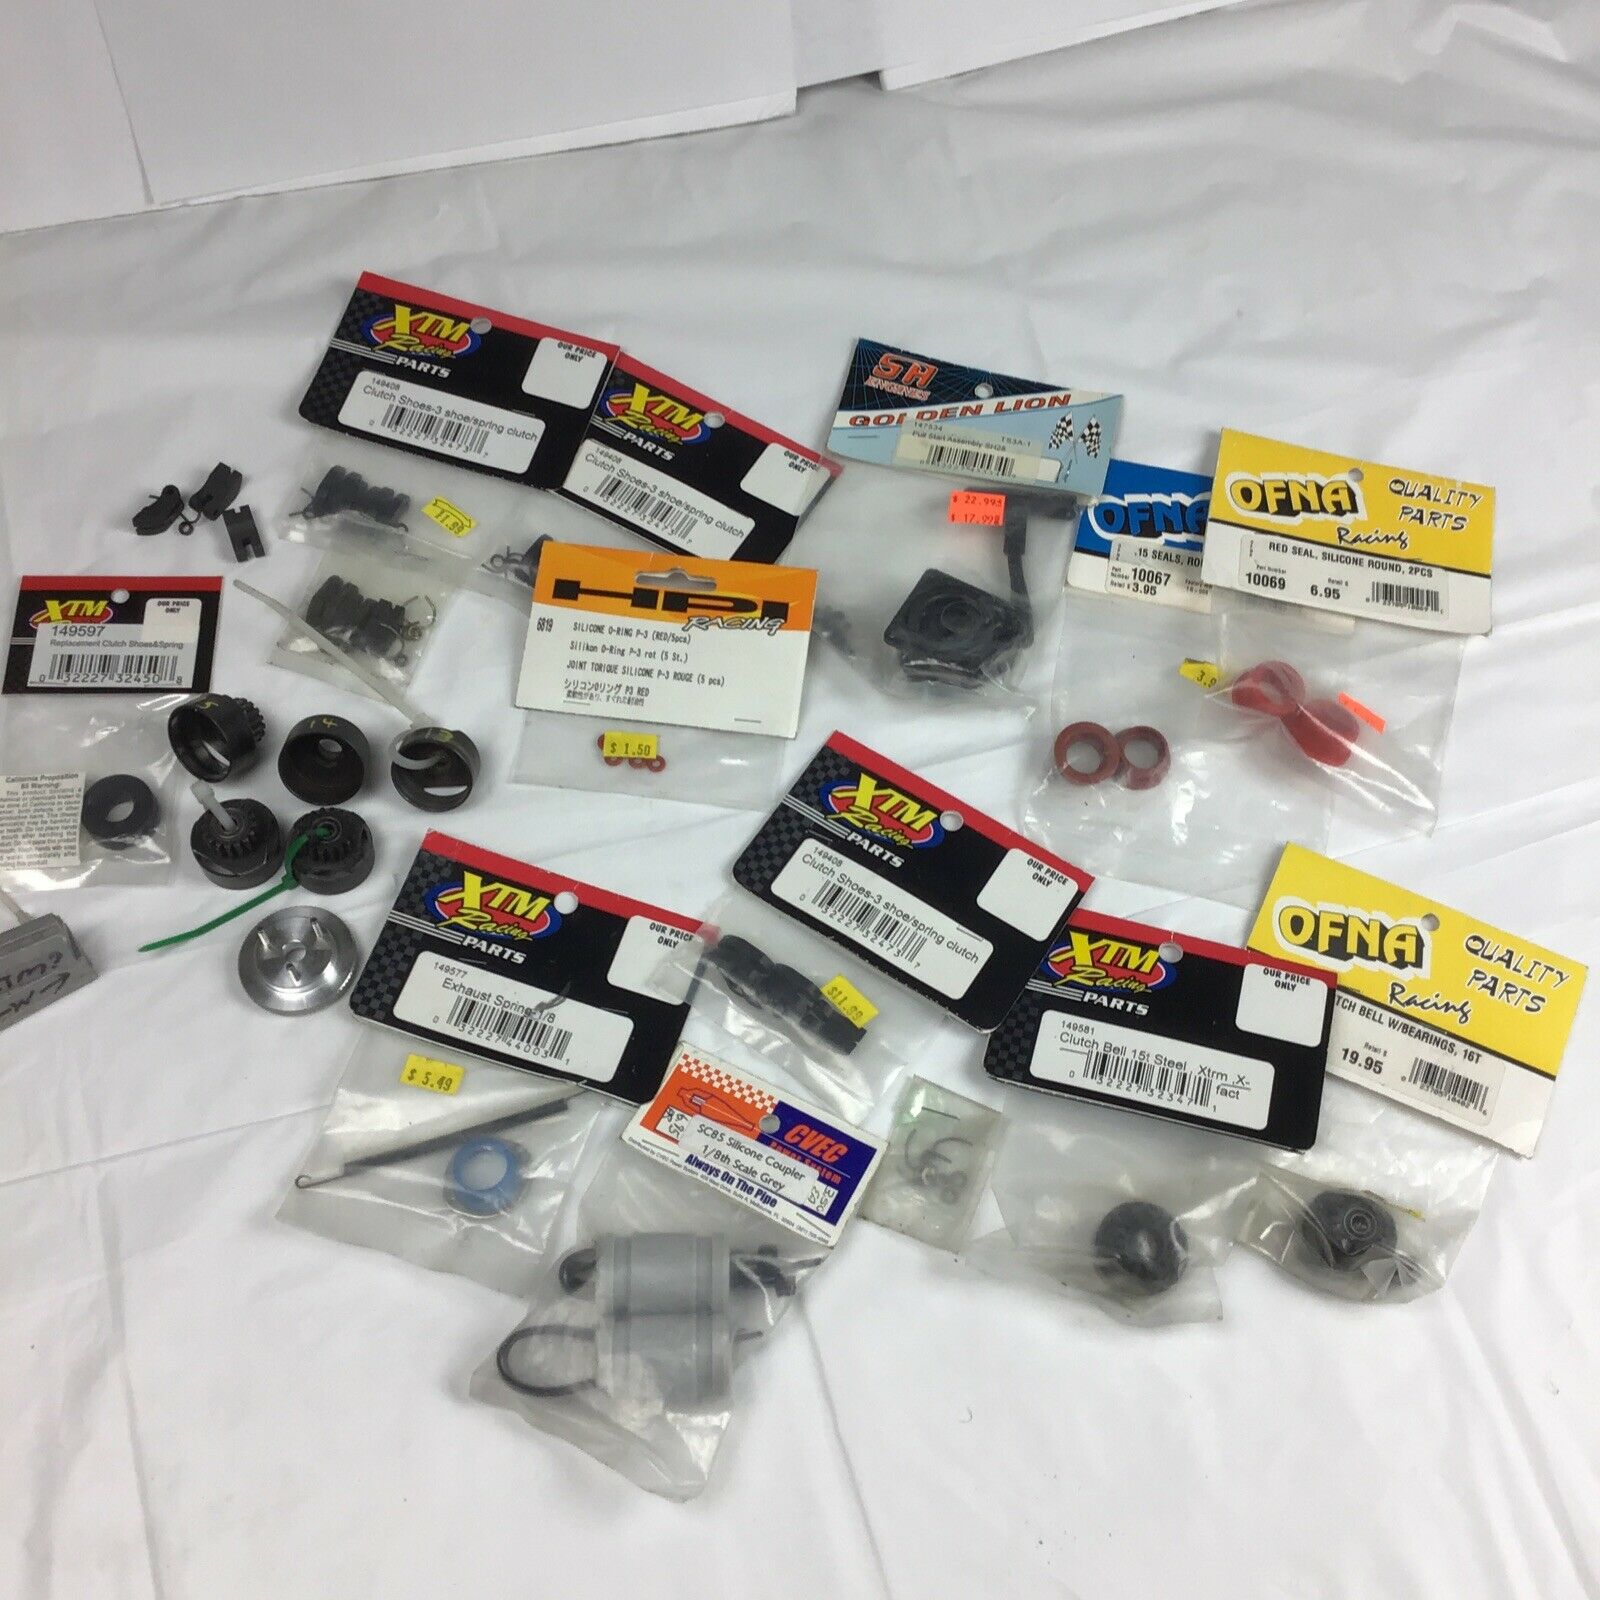 New Nitro Engine And Clutch Parts Lot Preowned Traxxas Losi Ofna Hpi Sirio